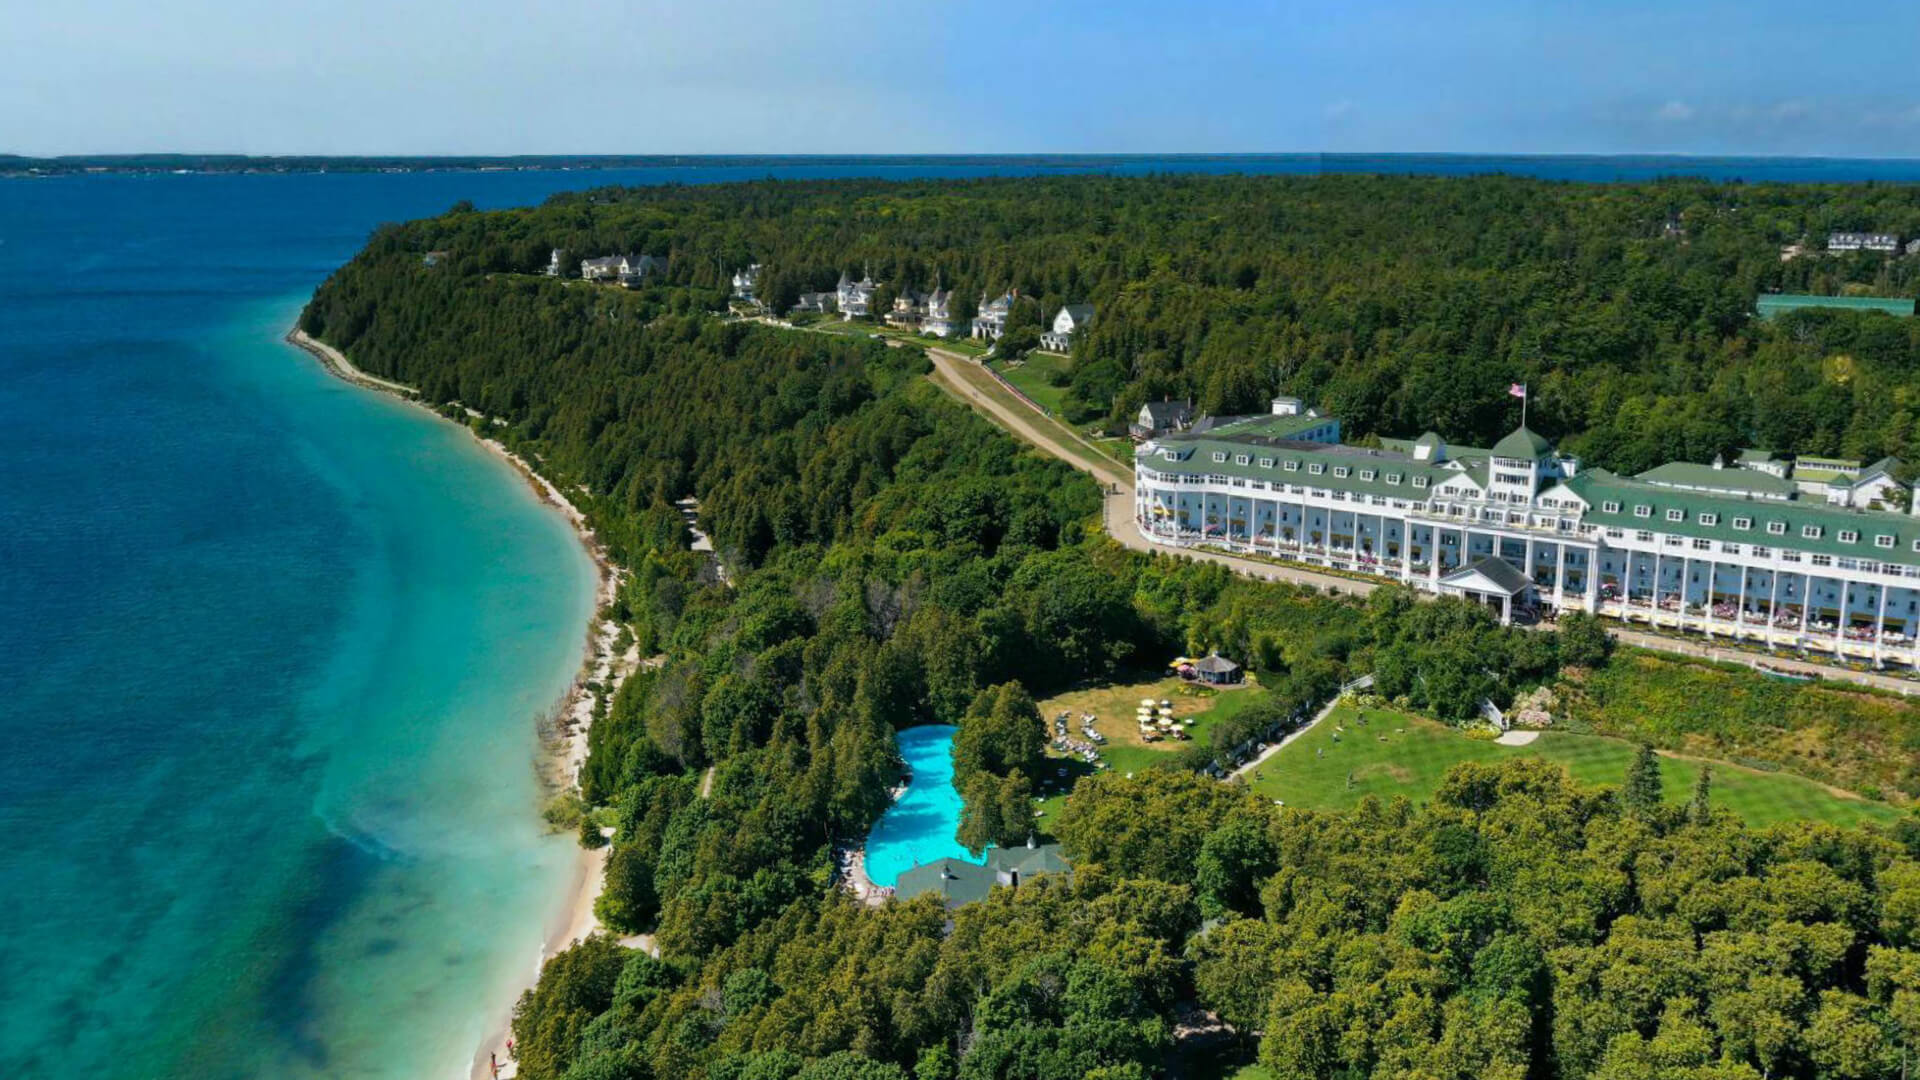 A beautiful aerial shot of the Grand Hotel and Lake Huron.